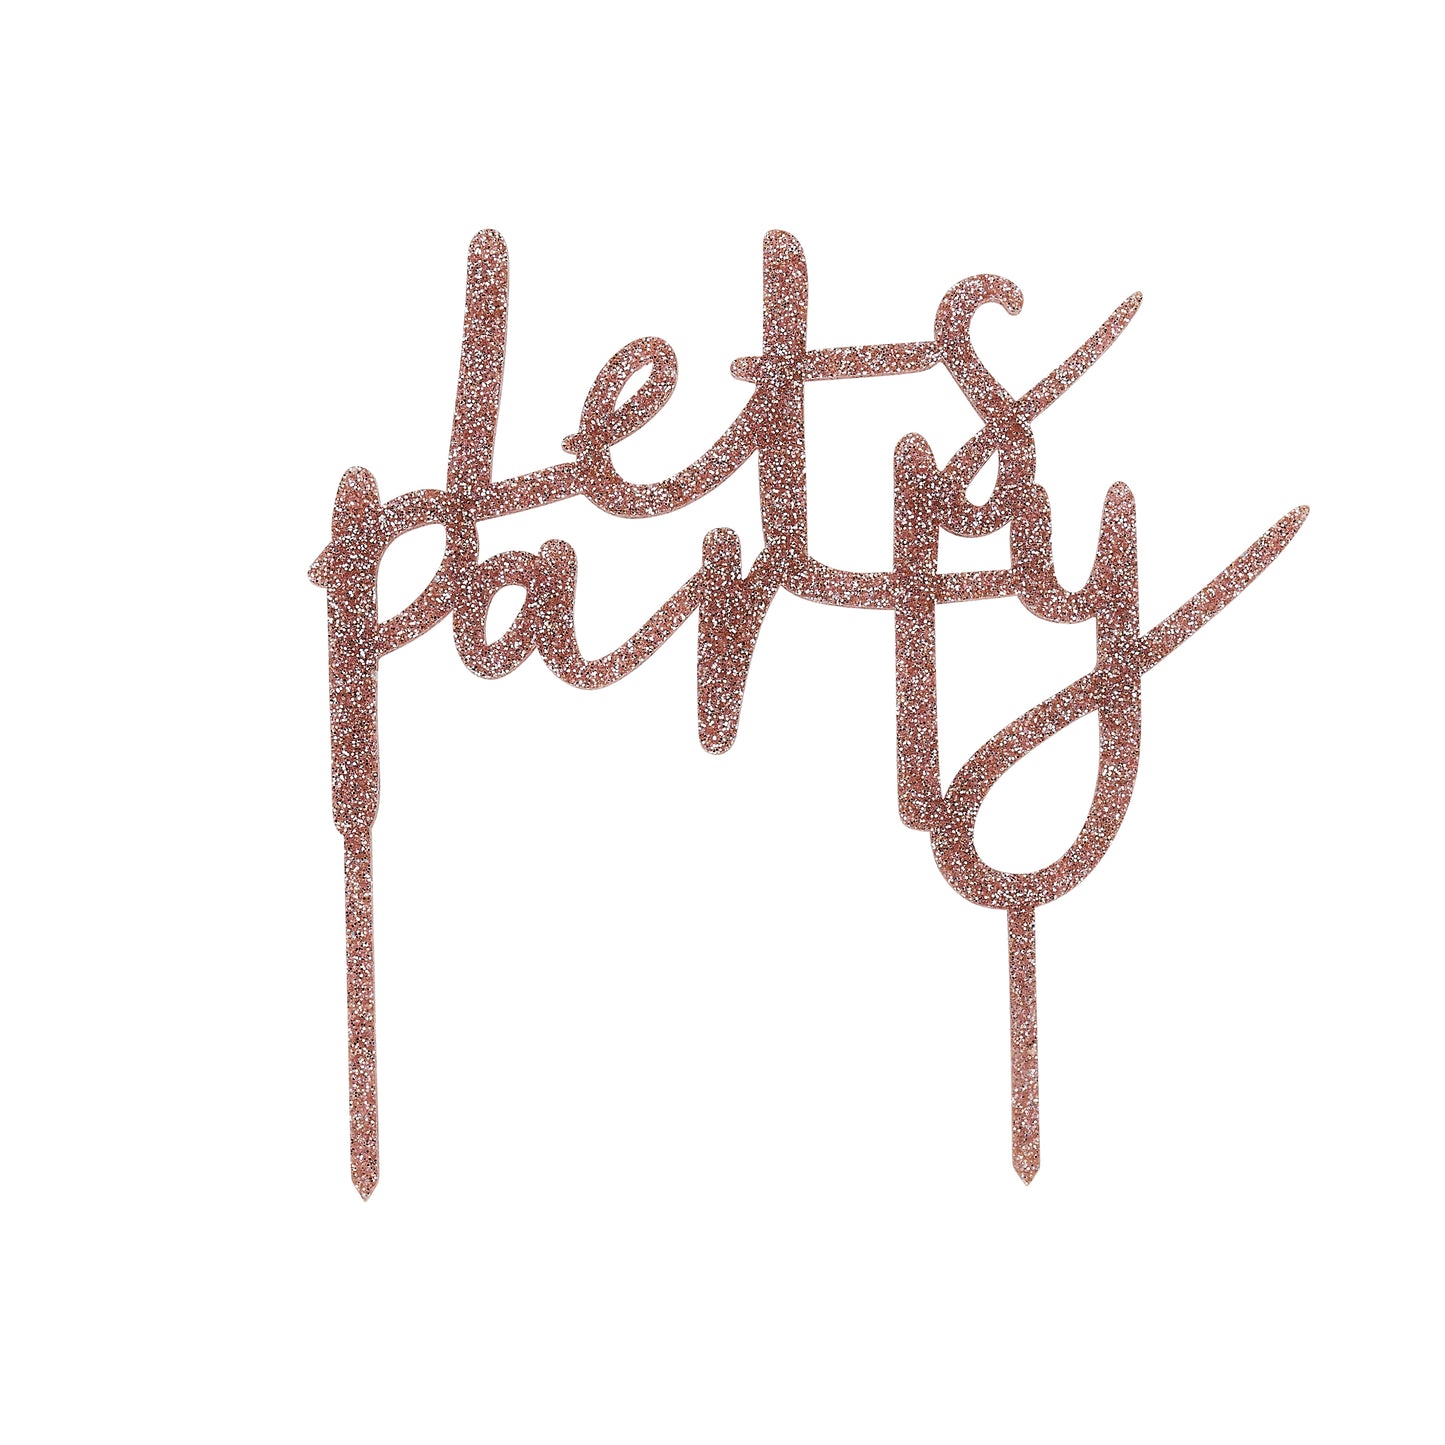 Hootyballoo Rose Gold 'Lets Party' Cake Topper Decoration Birthday Partyware